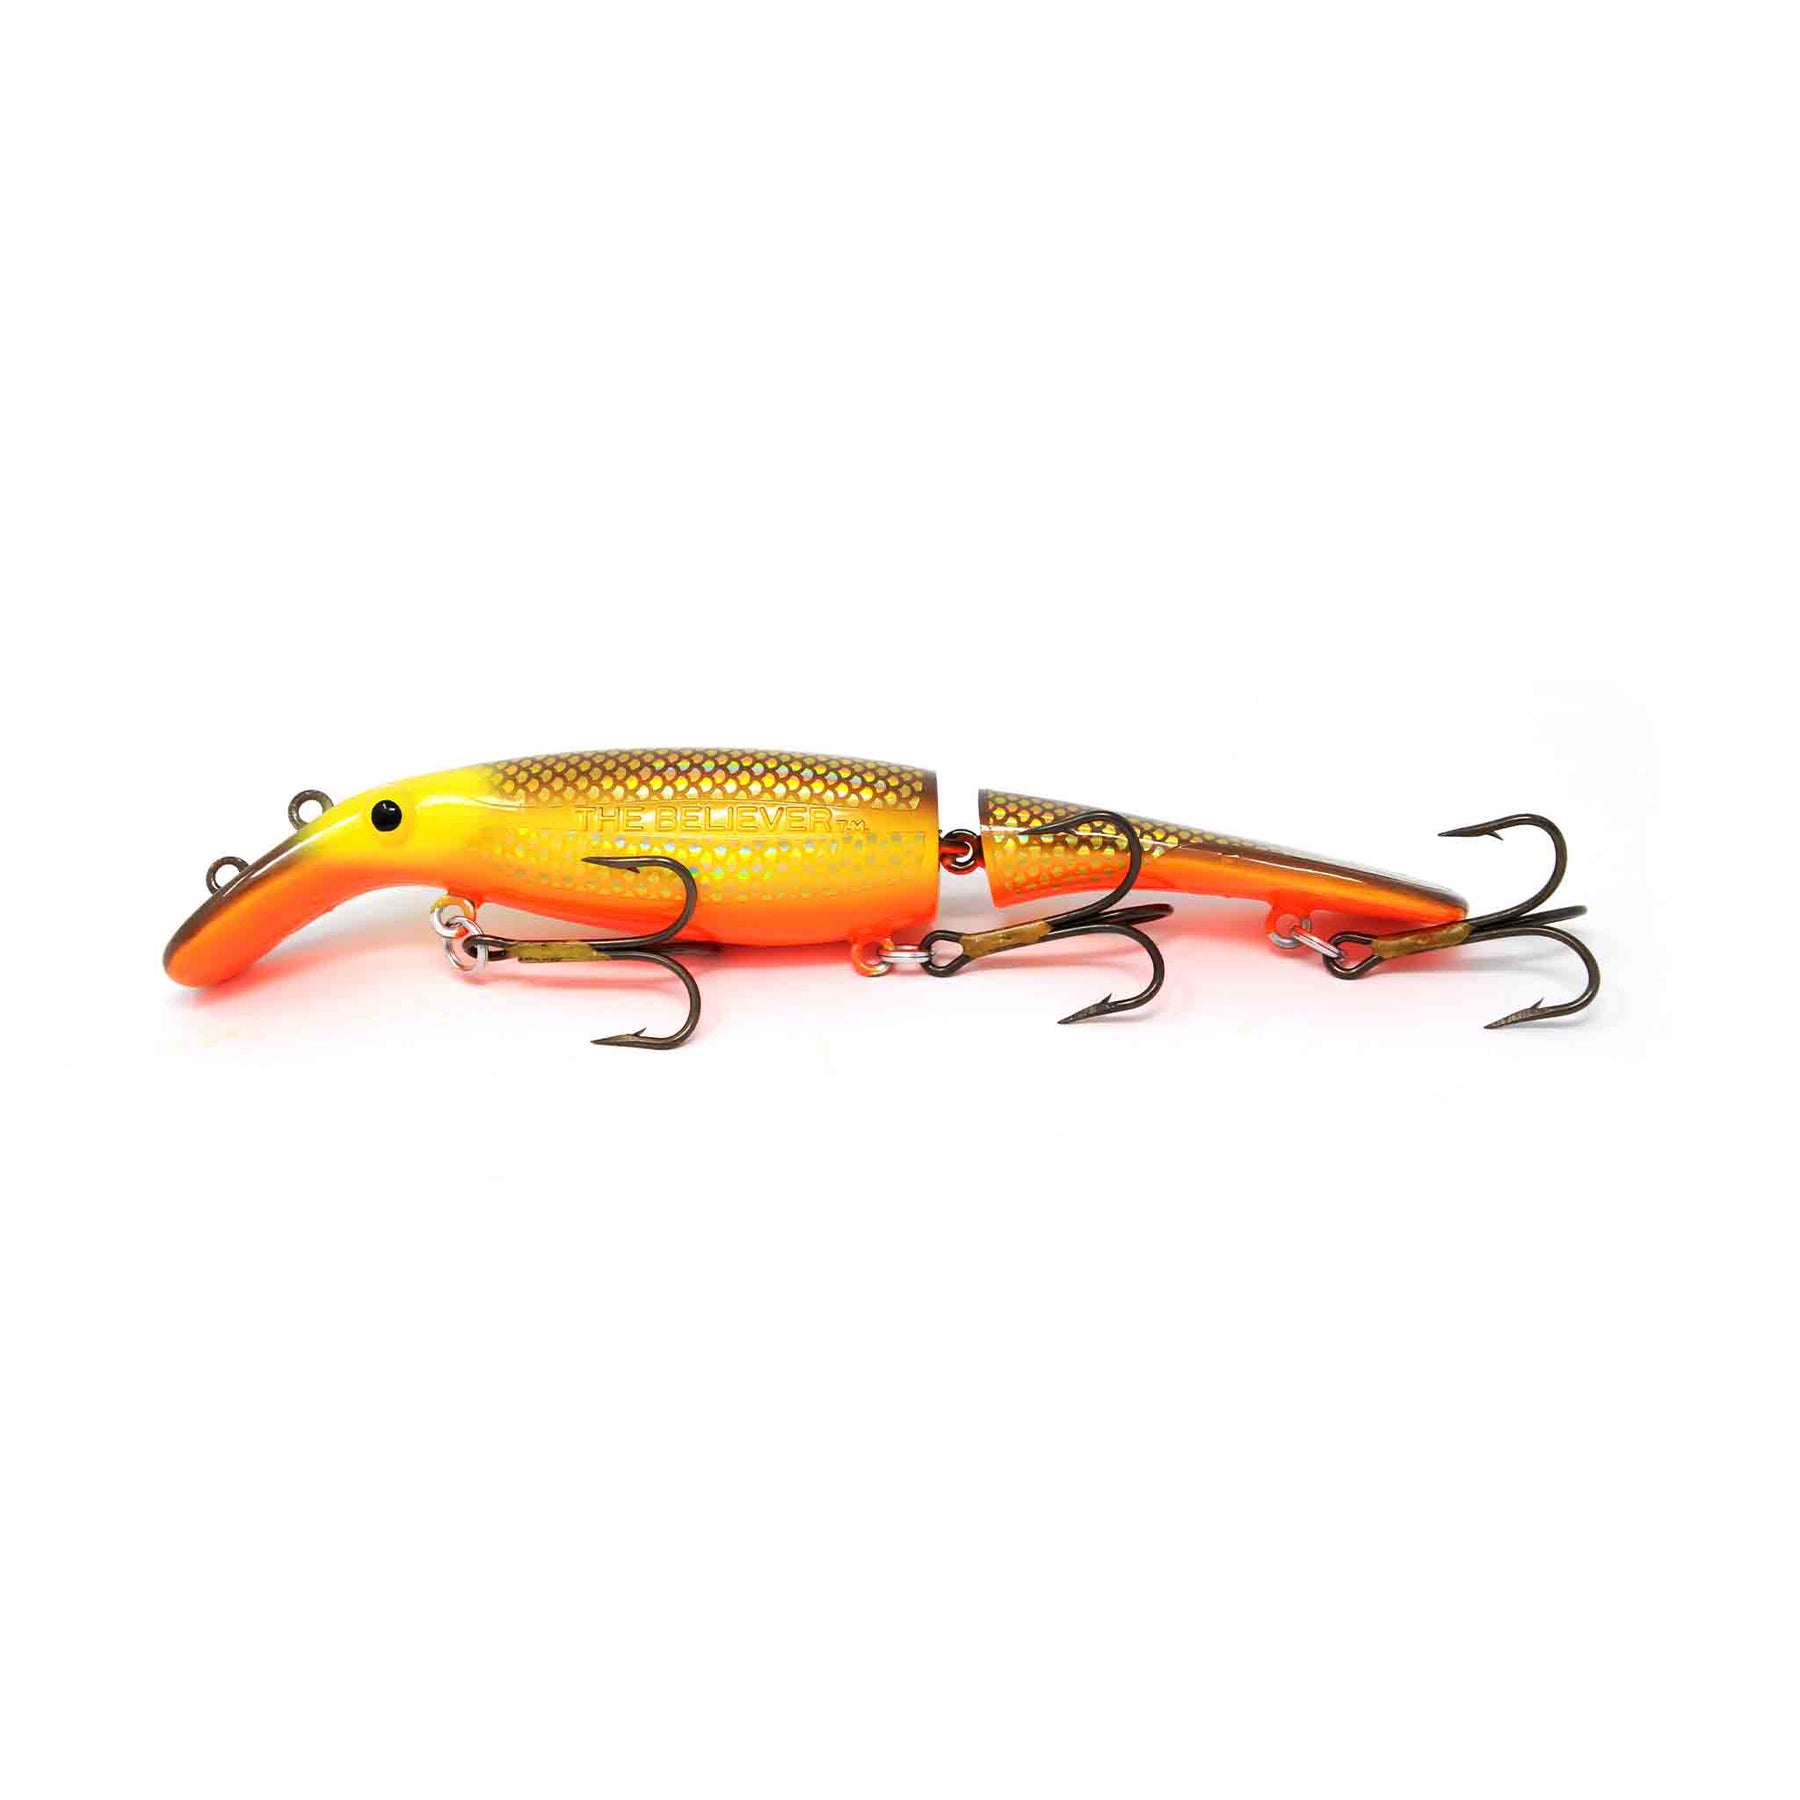 View of Crankbaits Drifter Tackle Believer Jointed 10" Crankbait Holo Hot Walleye available at EZOKO Pike and Musky Shop